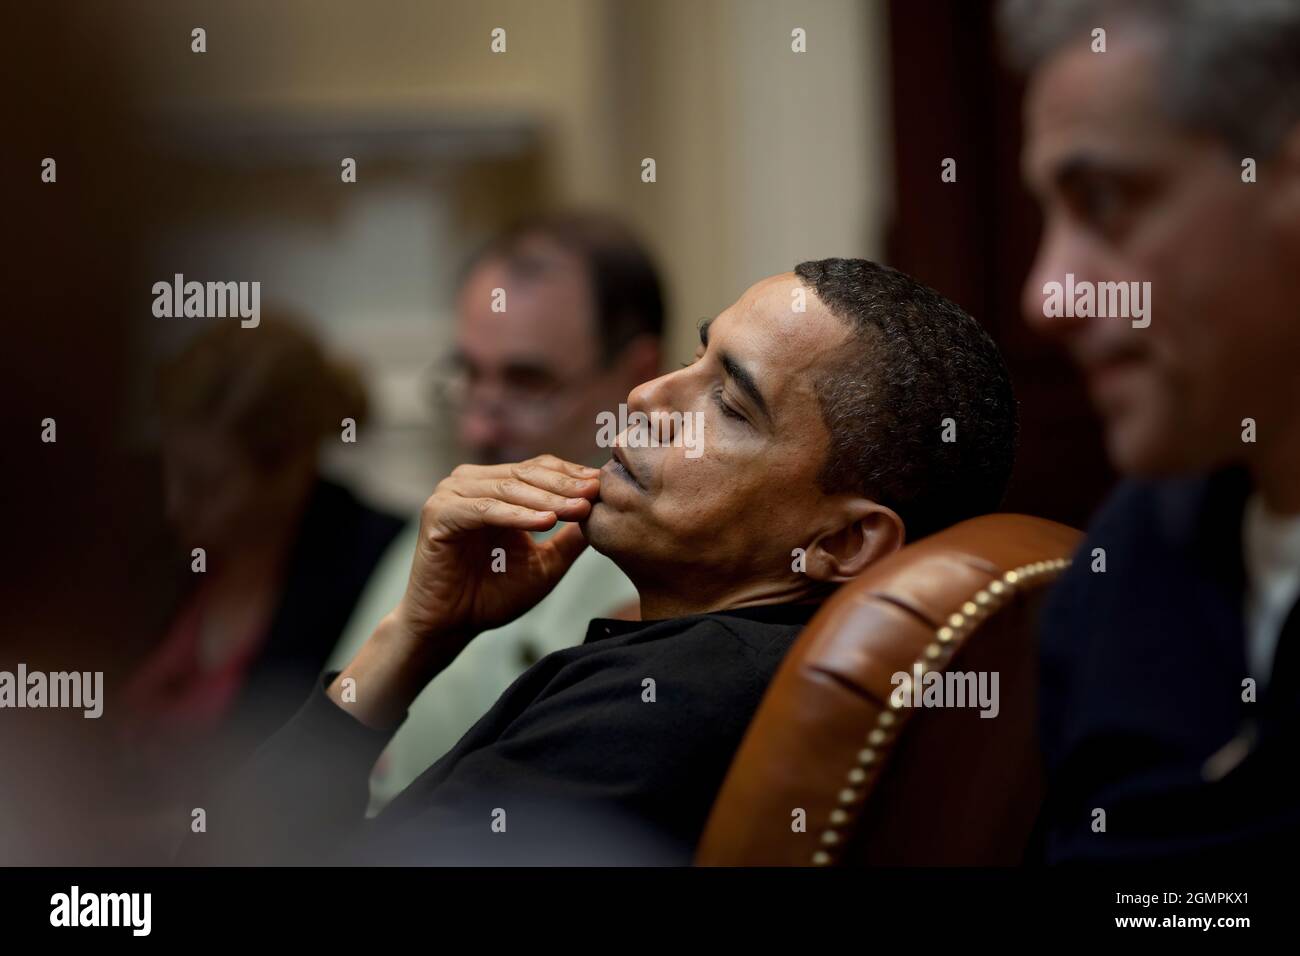 President Obama reflects during an economic meeting with advisors in the Roosevelt Room. He is seated between Senior Advisor David Axelrod and Chief of Staff Rahm Emanuel , right. 3/15/09. Official White House Photo by Pete Souza Stock Photo